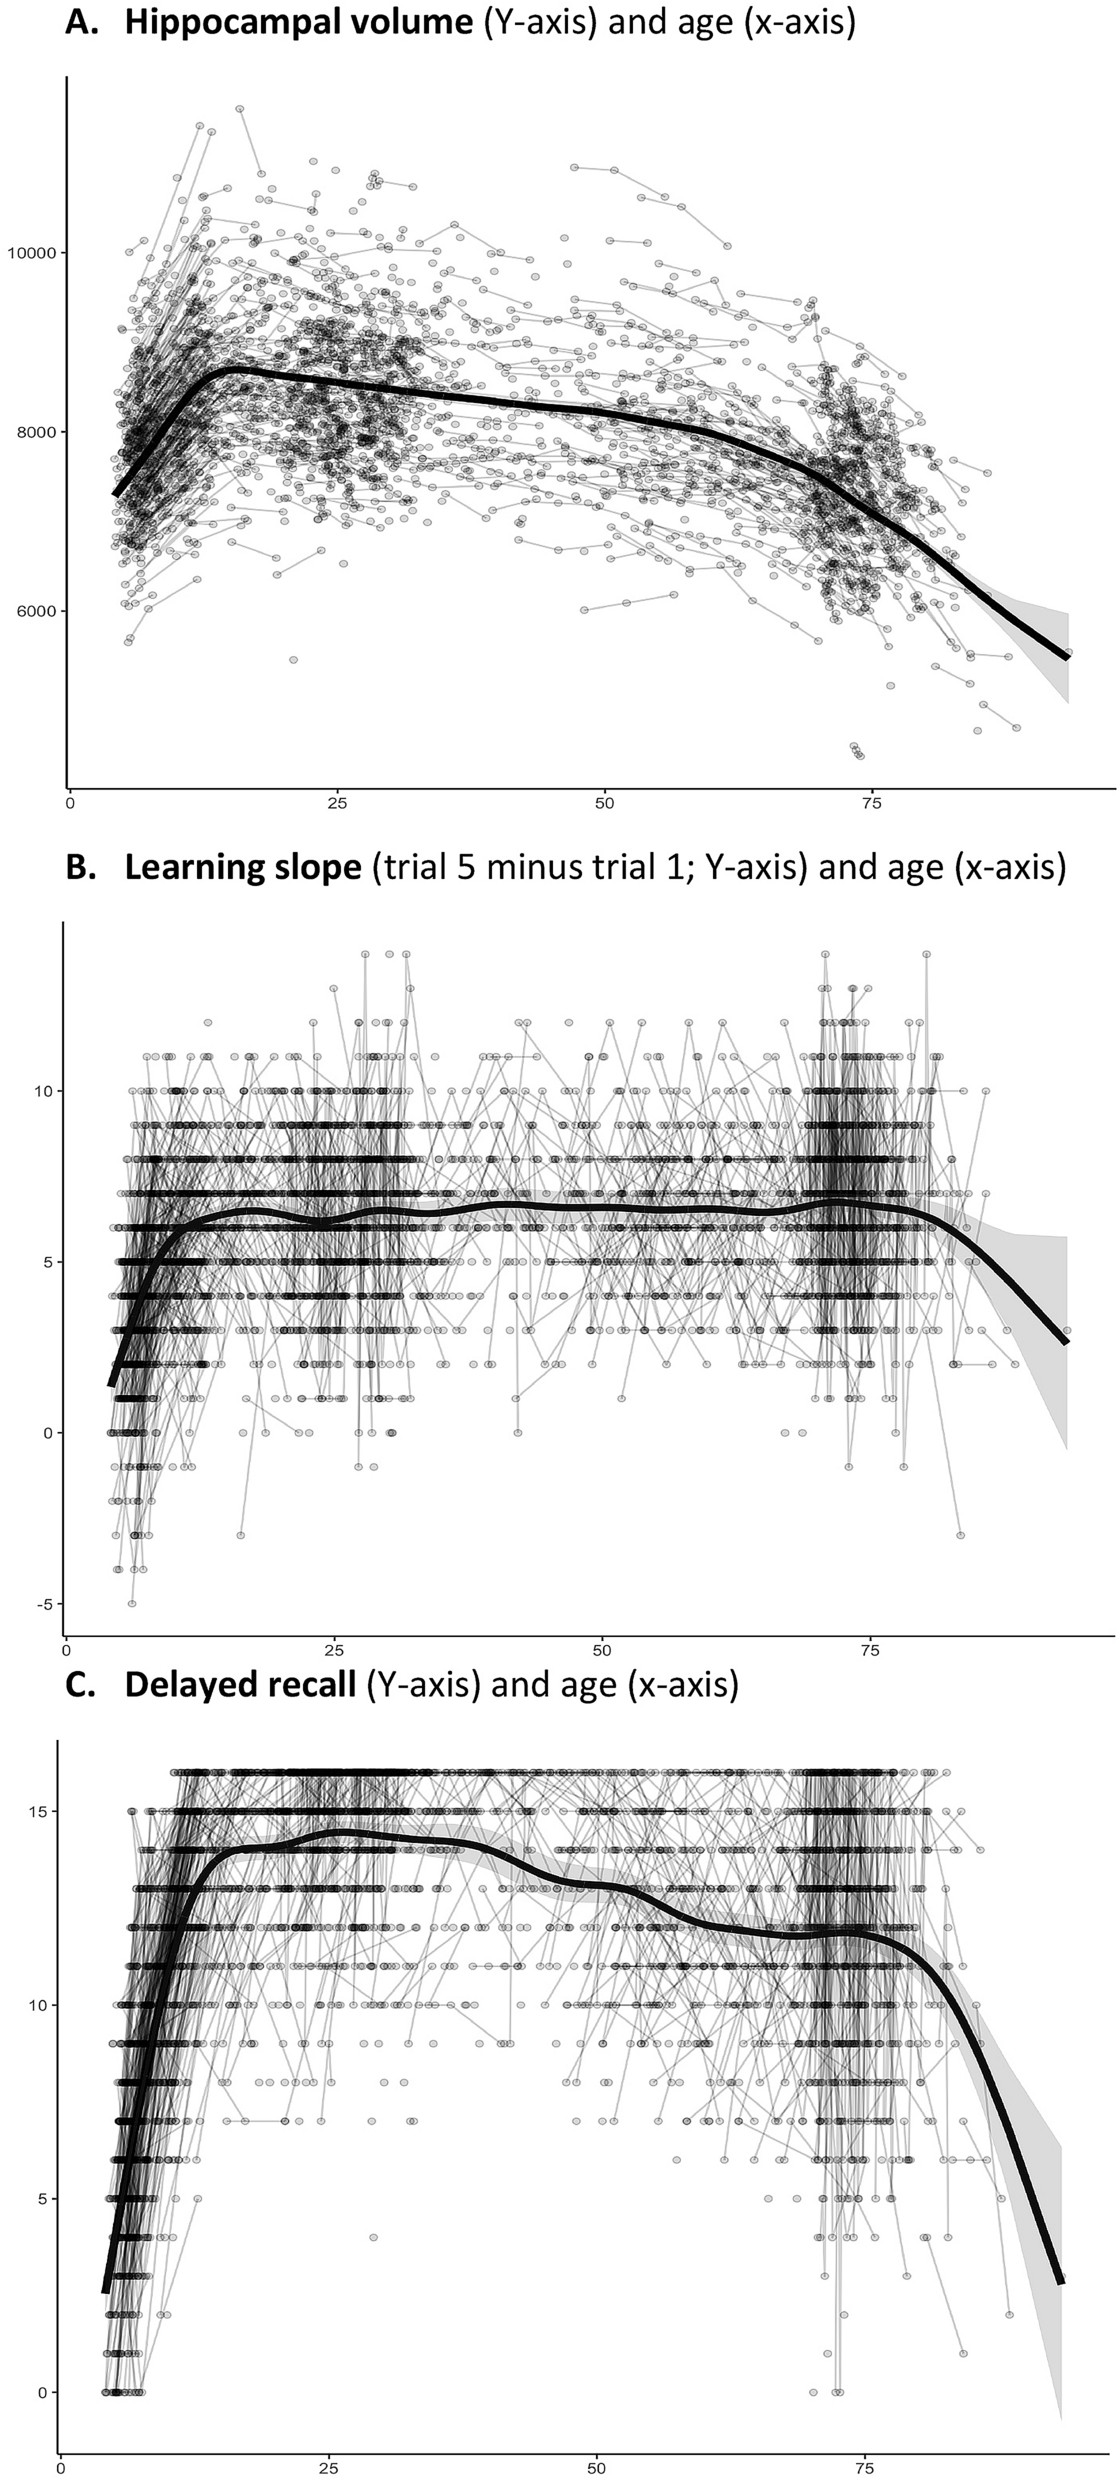 Within-session verbal learning slope is predictive of lifespan delayed  recall, hippocampal volume, and memory training benefit, and is heritable